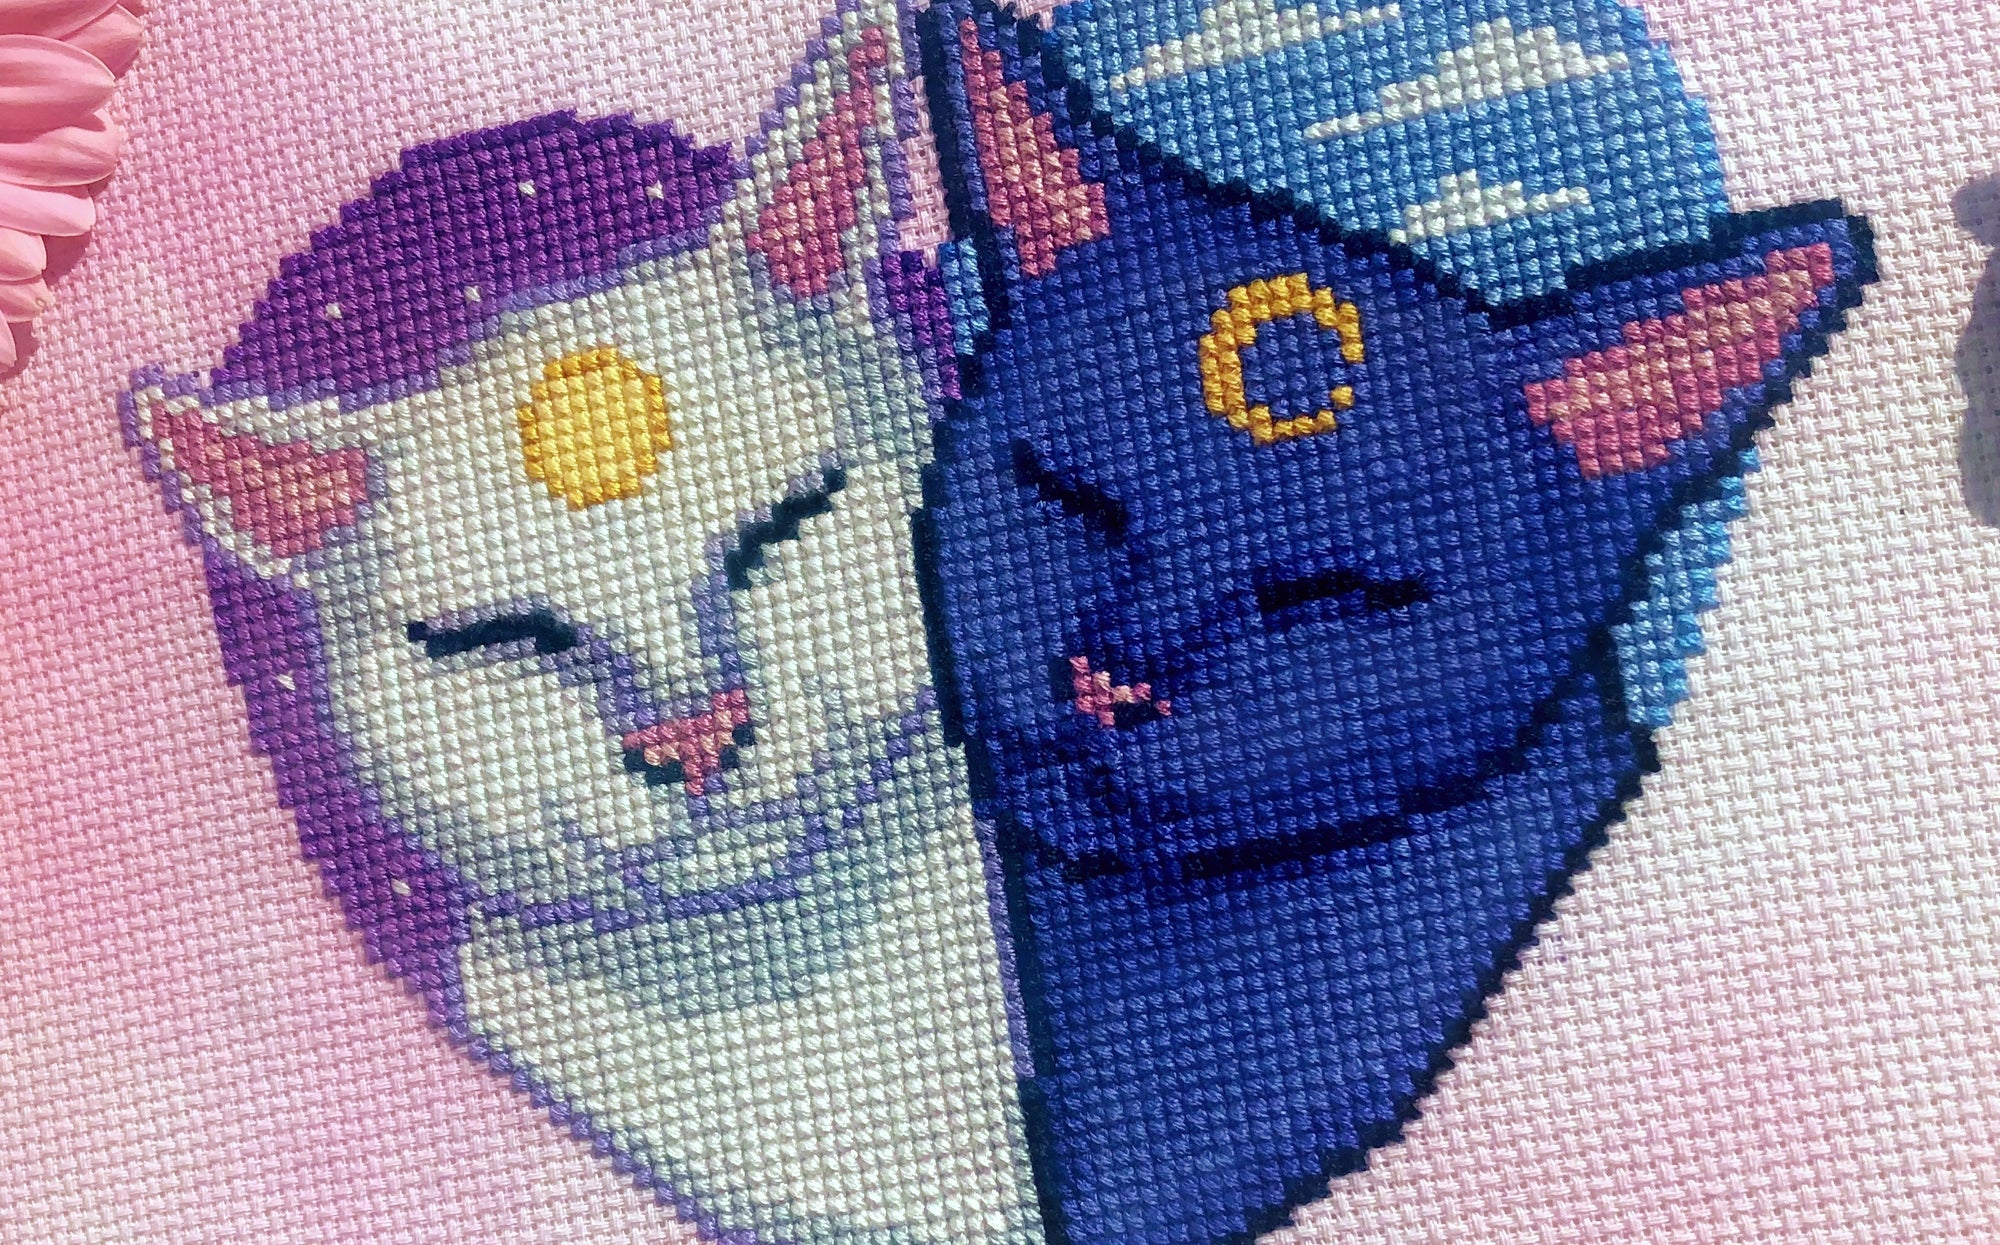 Slightly zoomed in view of Smitten Kittens. The cat on the left is white with a sun on his forehead, the cat on the left is blue with a moon on his forehead. Their noses and earsare bright pink. The scene contains a lot of soft, vibrant colors.